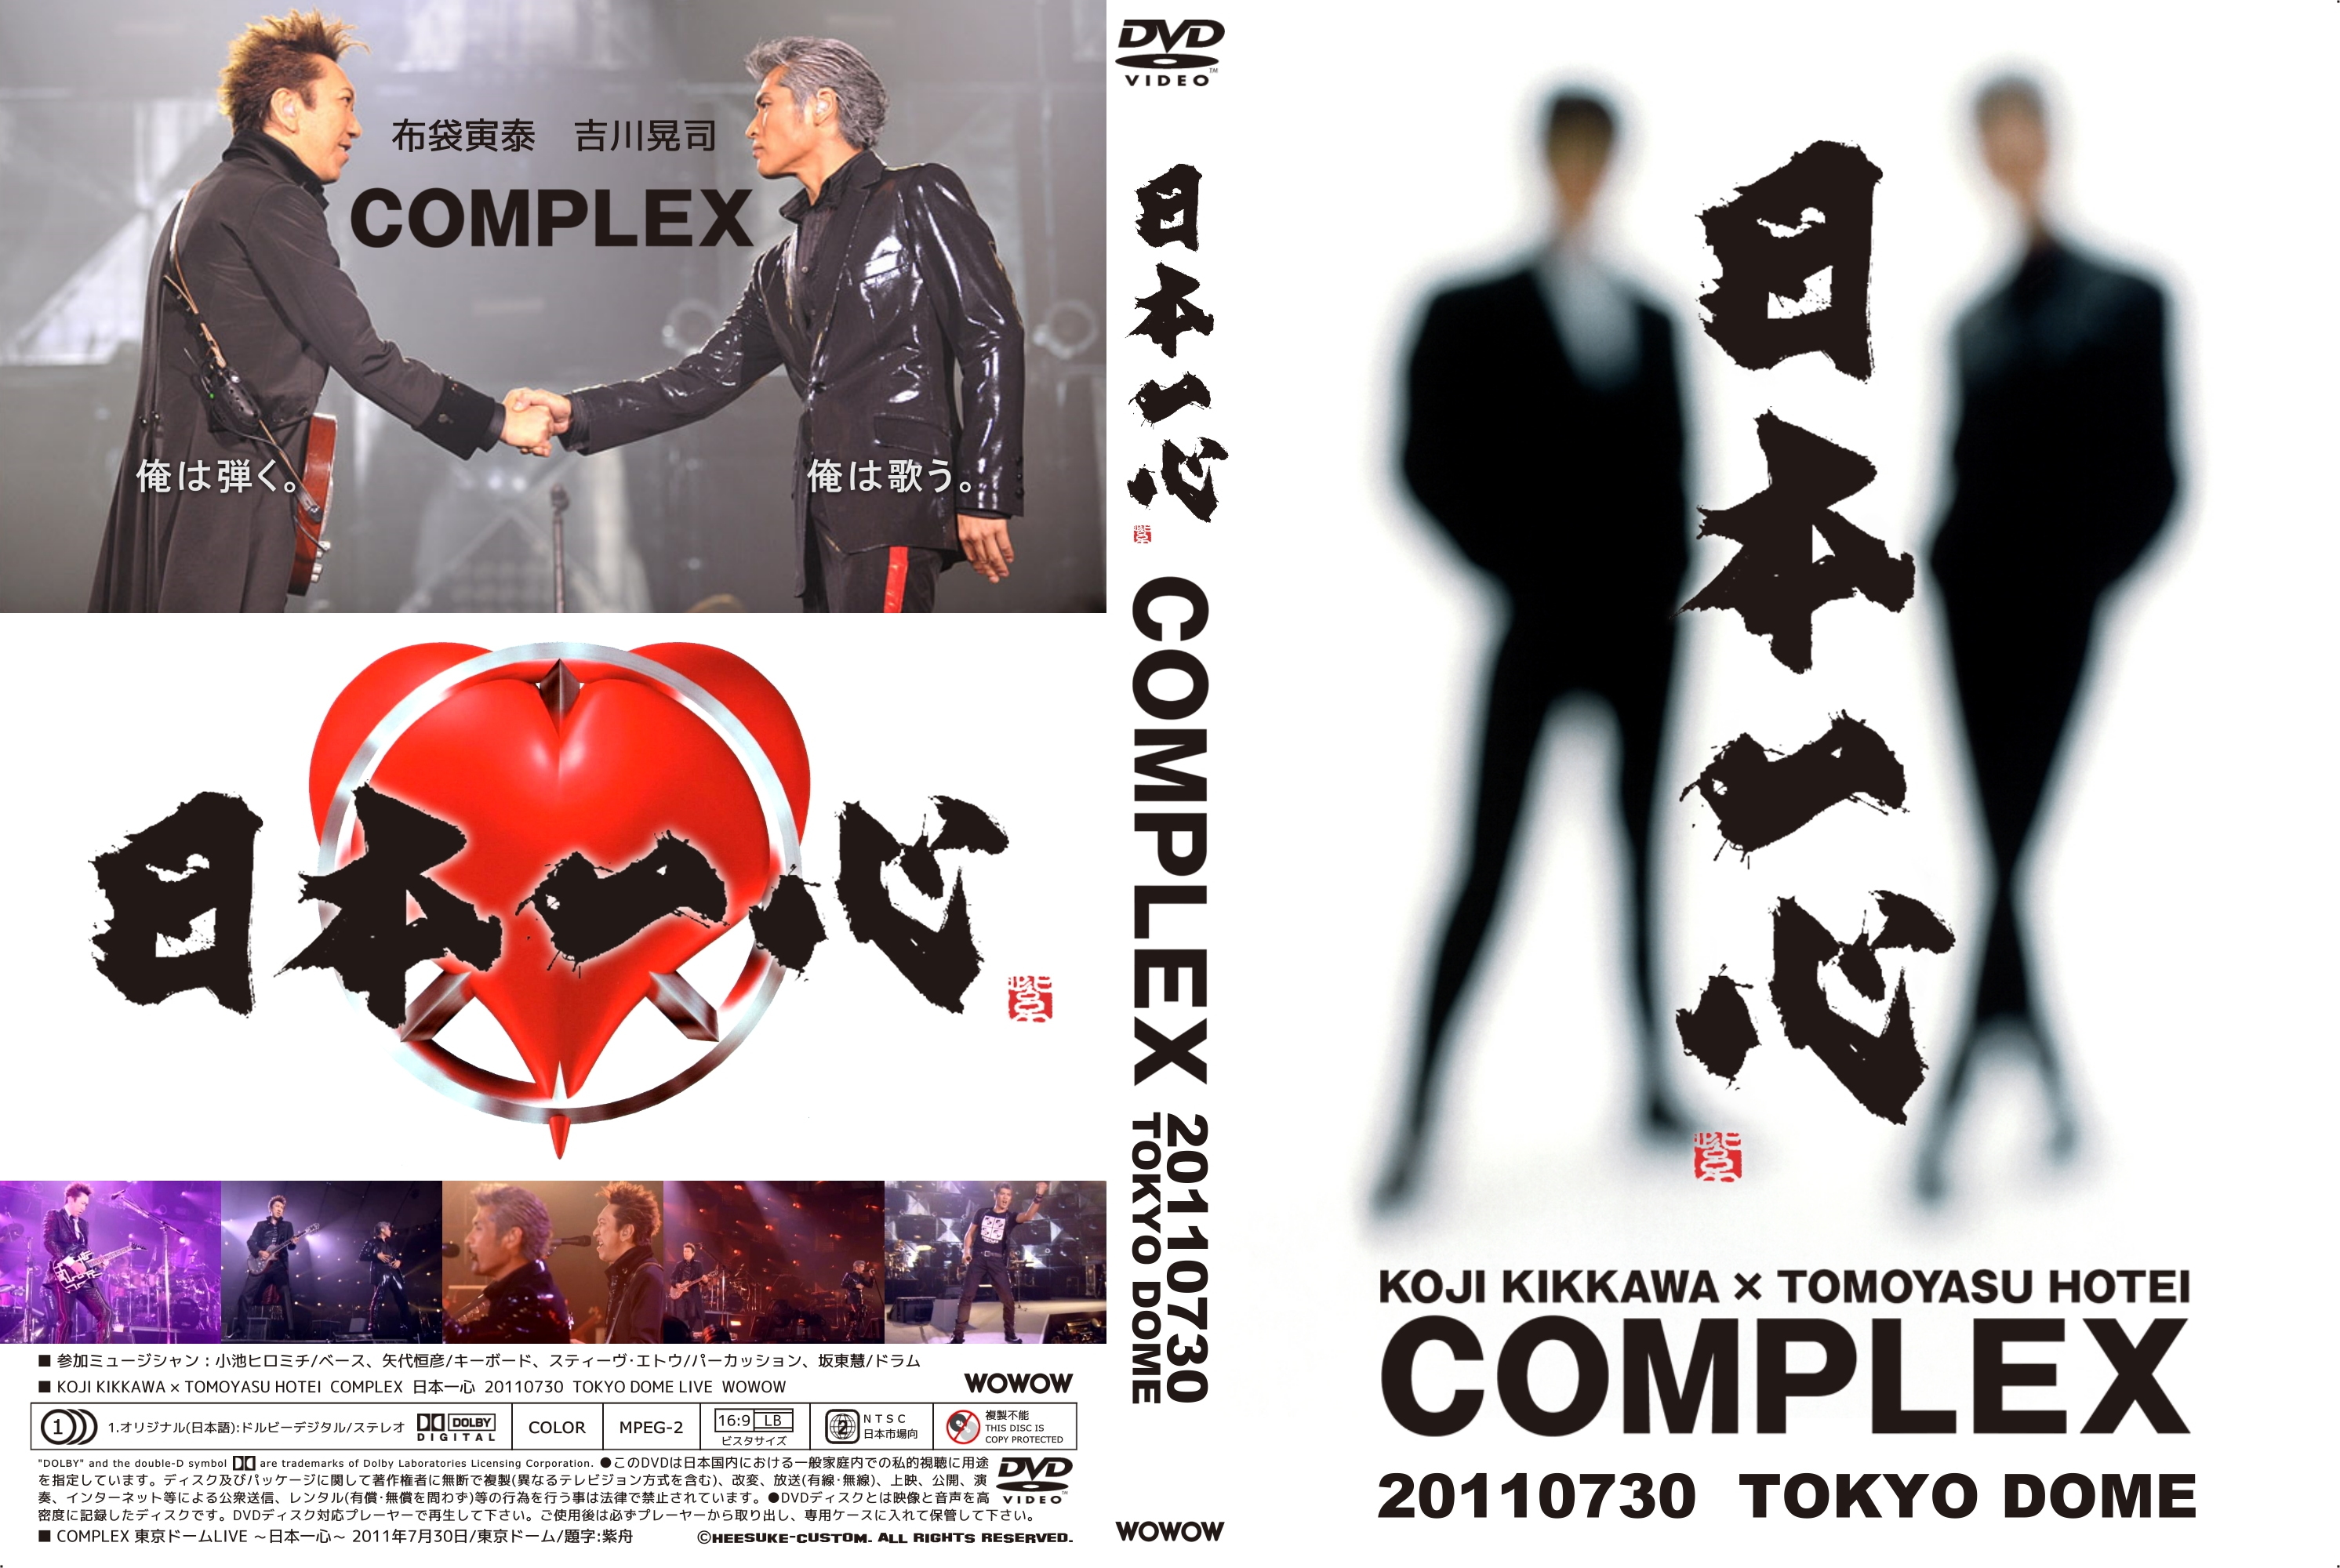 COMPLEX 2011 TOKYO DOMEライブ DVD BOX - nghiencuudinhluong.com